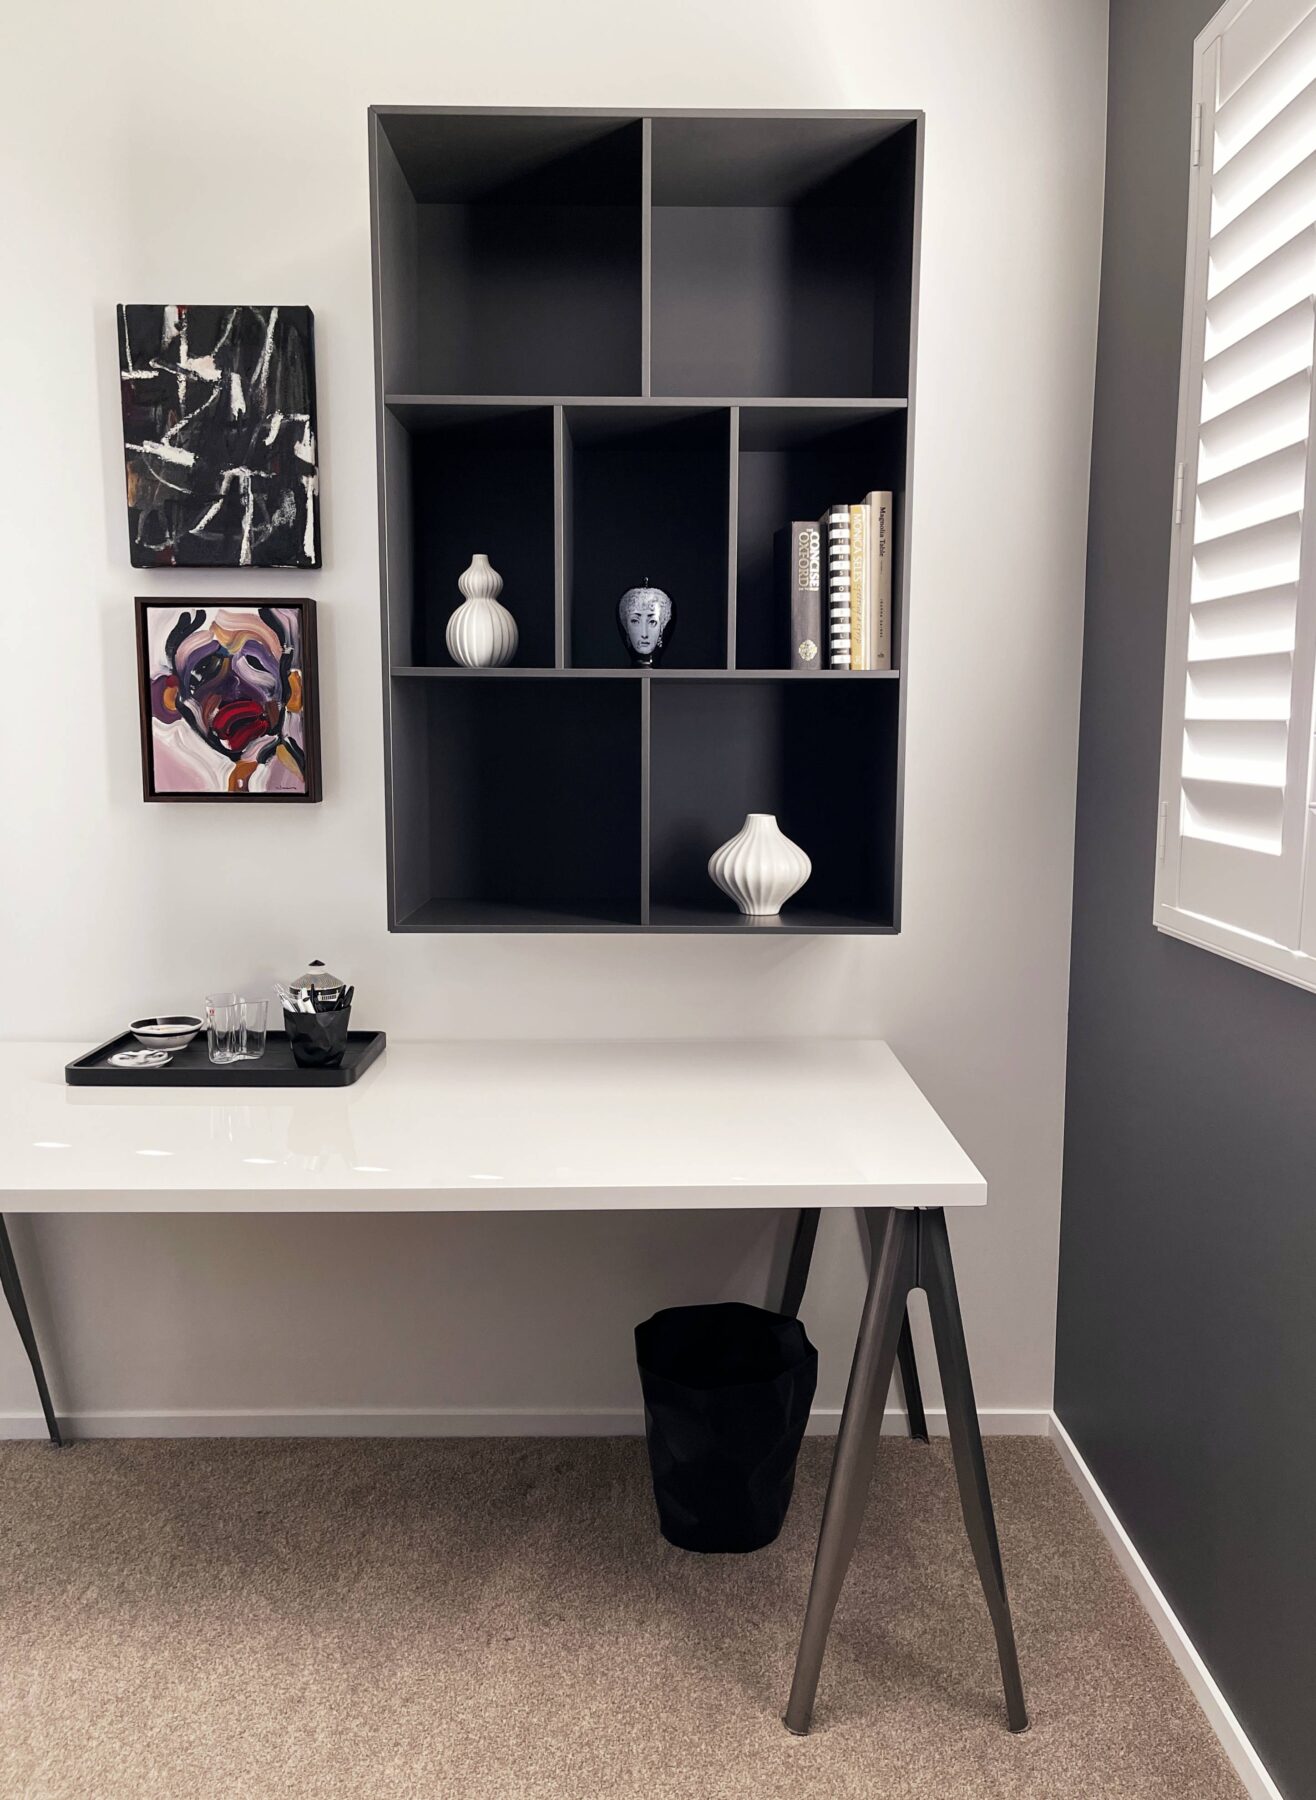 luxury monochrome office space, wall mounted hanging bookshelf, white desk with dark grey legs and simple styling, white window shutters, work from home